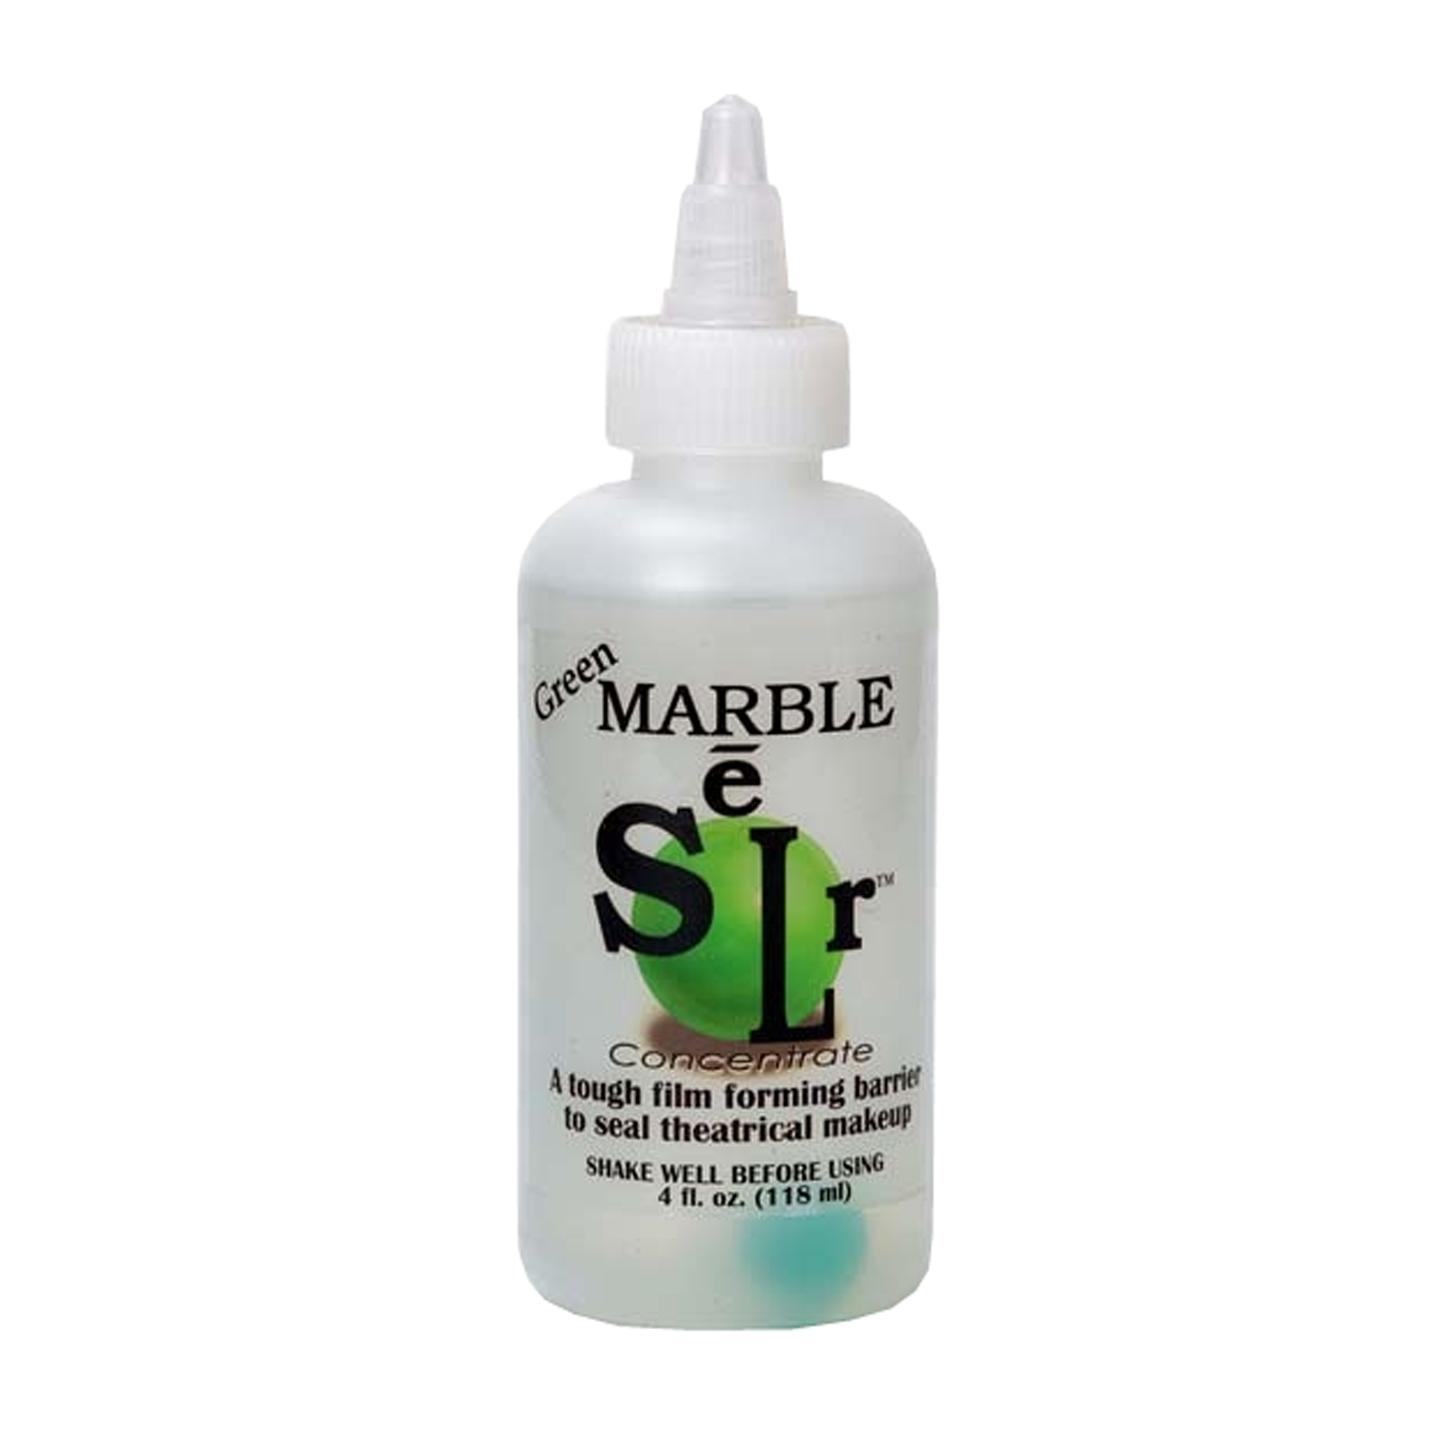 Green Marble SeLr Concentrate